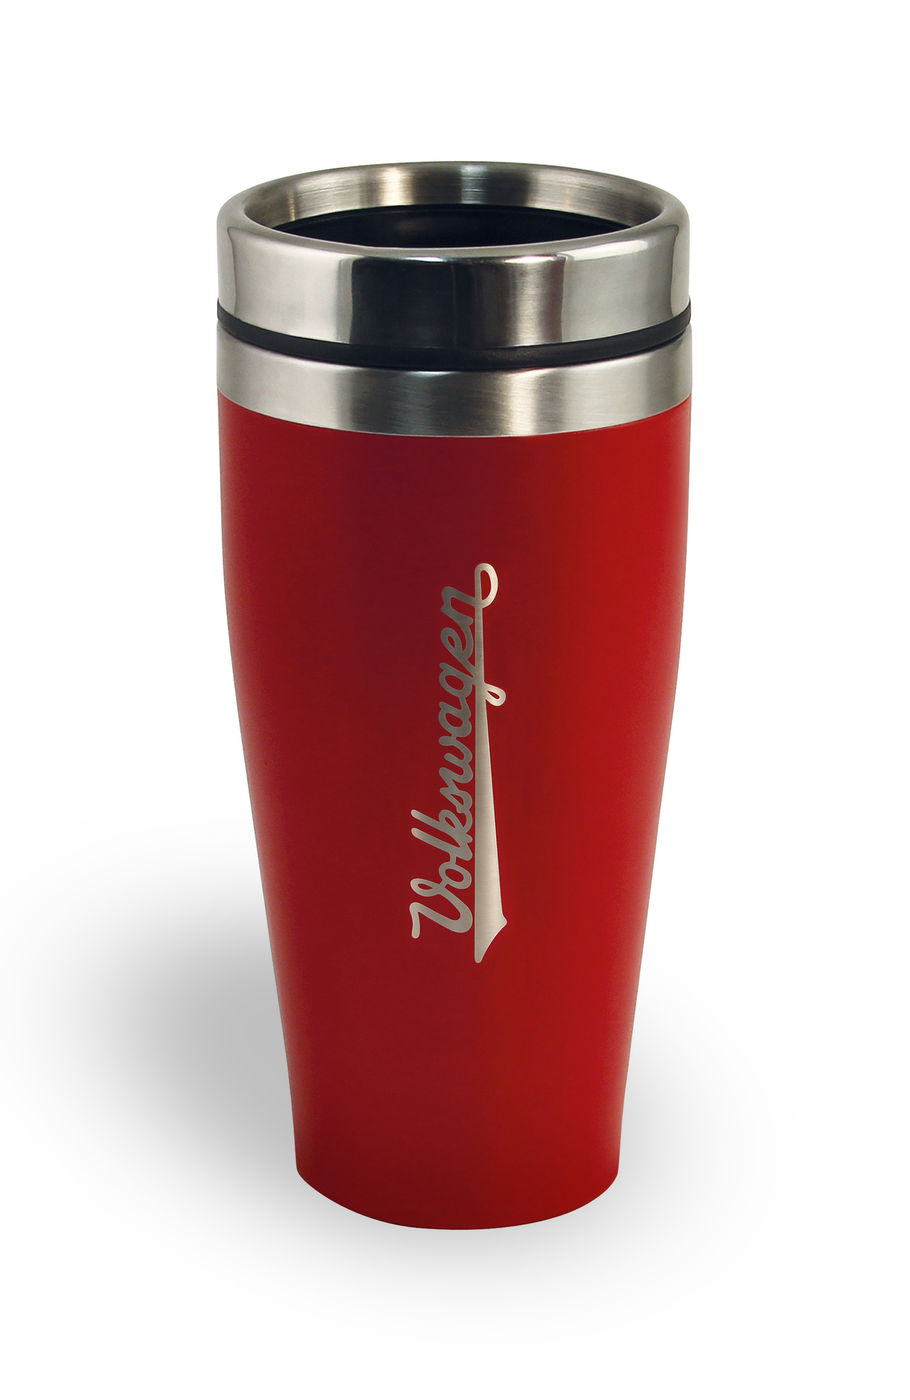 Thermo Becher
Thermo mug
Gobelet thermique